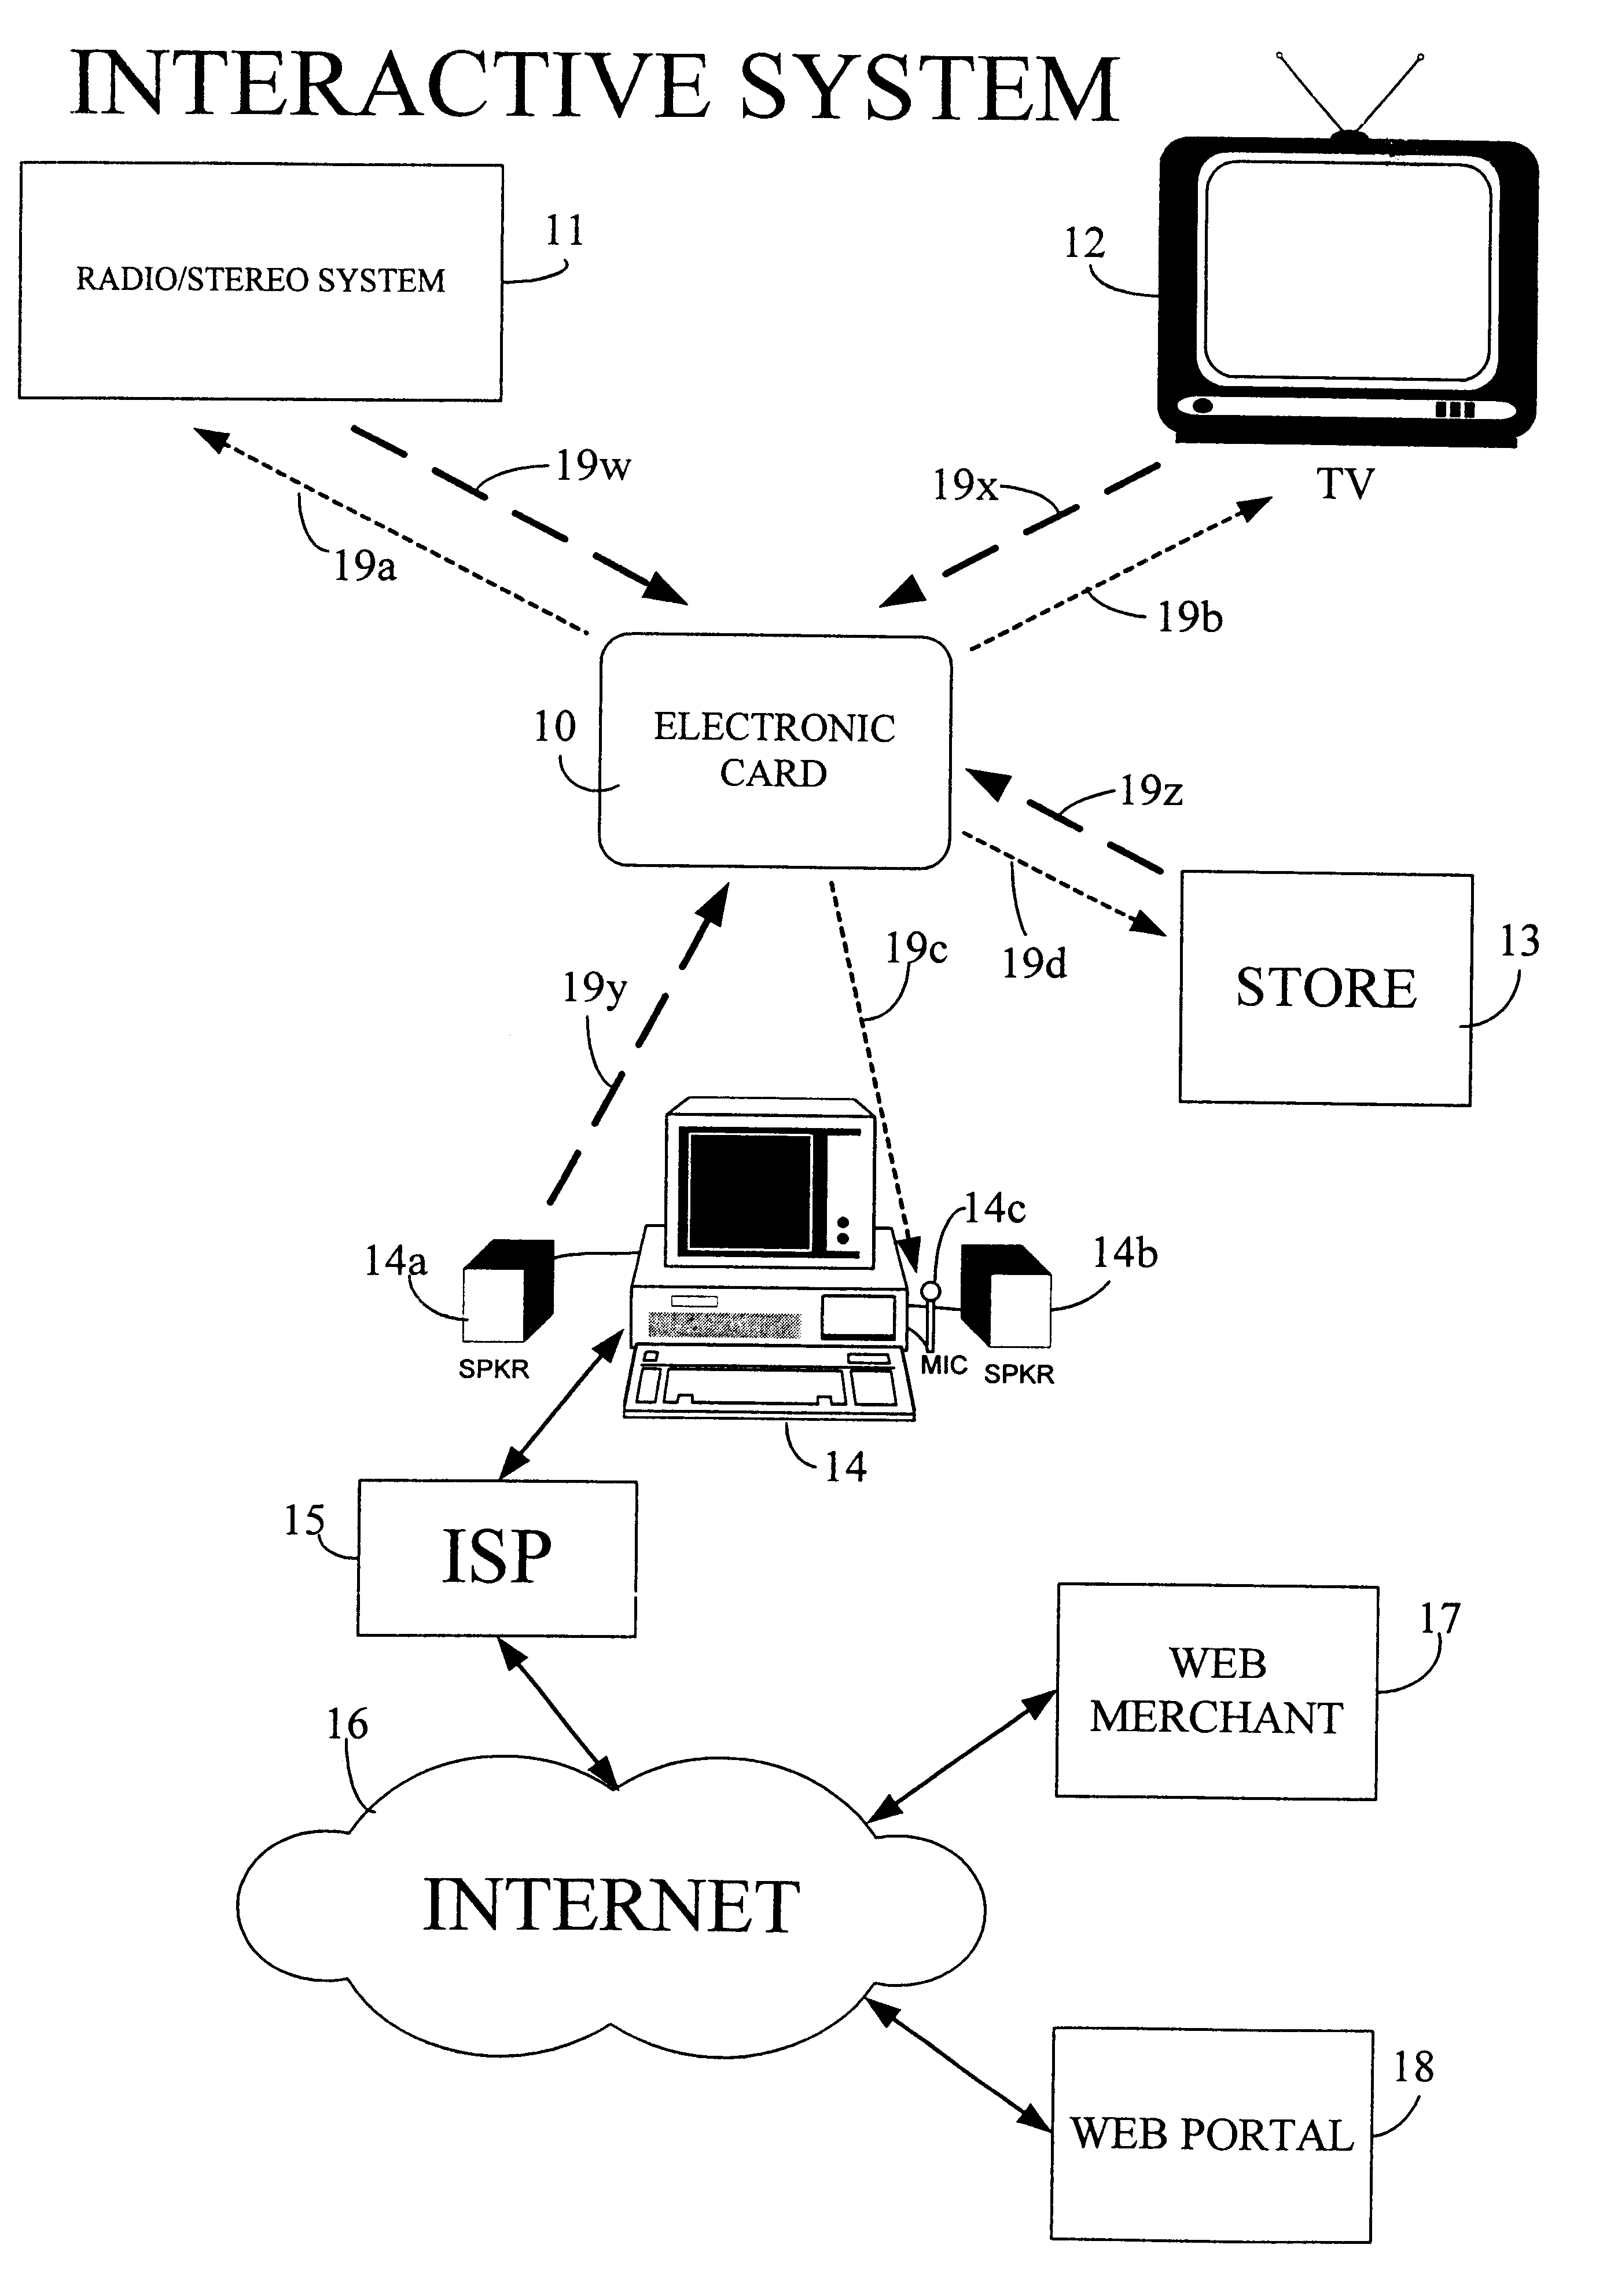 Physical presence digital authentication system